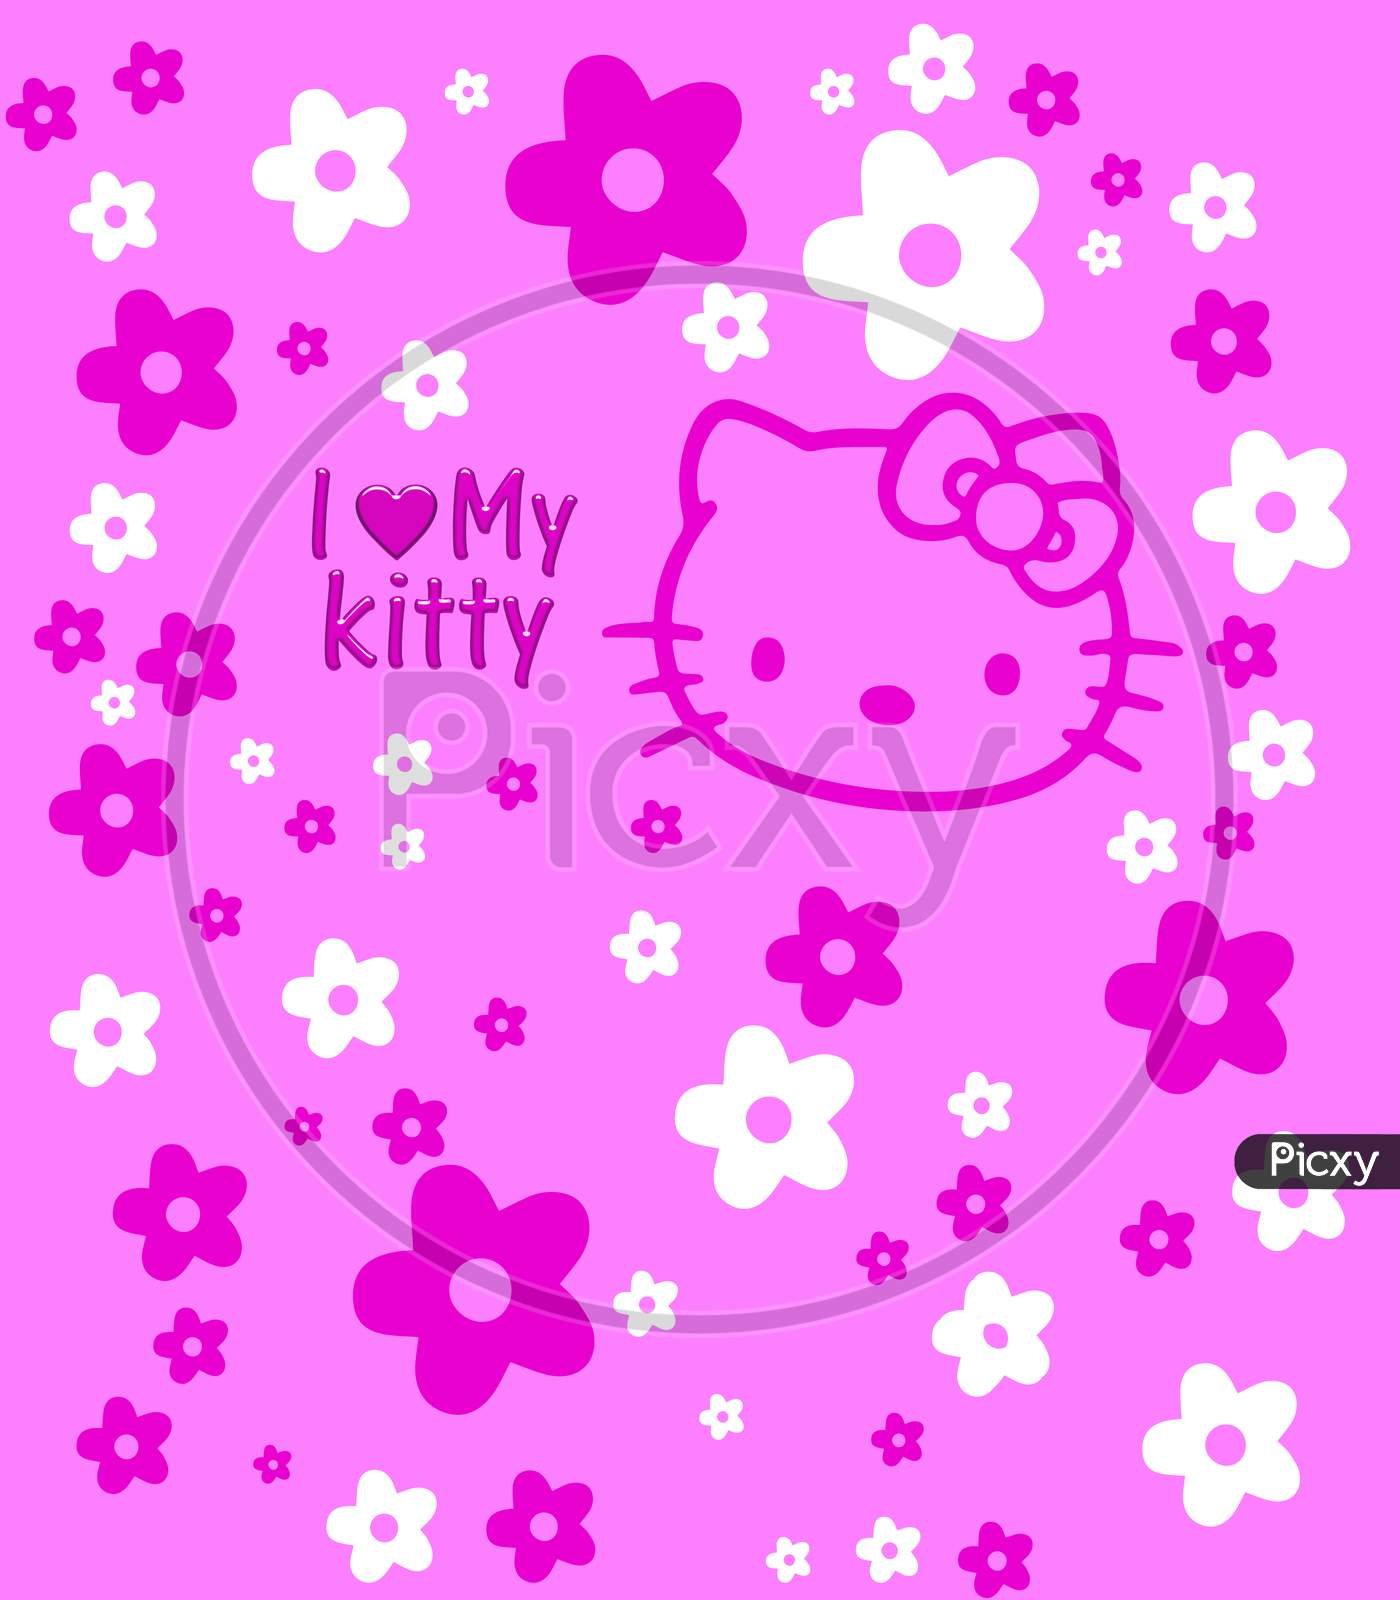 Cute Pink And White Flowers With Kitty With I Love My Kitty Text On Pink Background Illustration Wallpaper Design